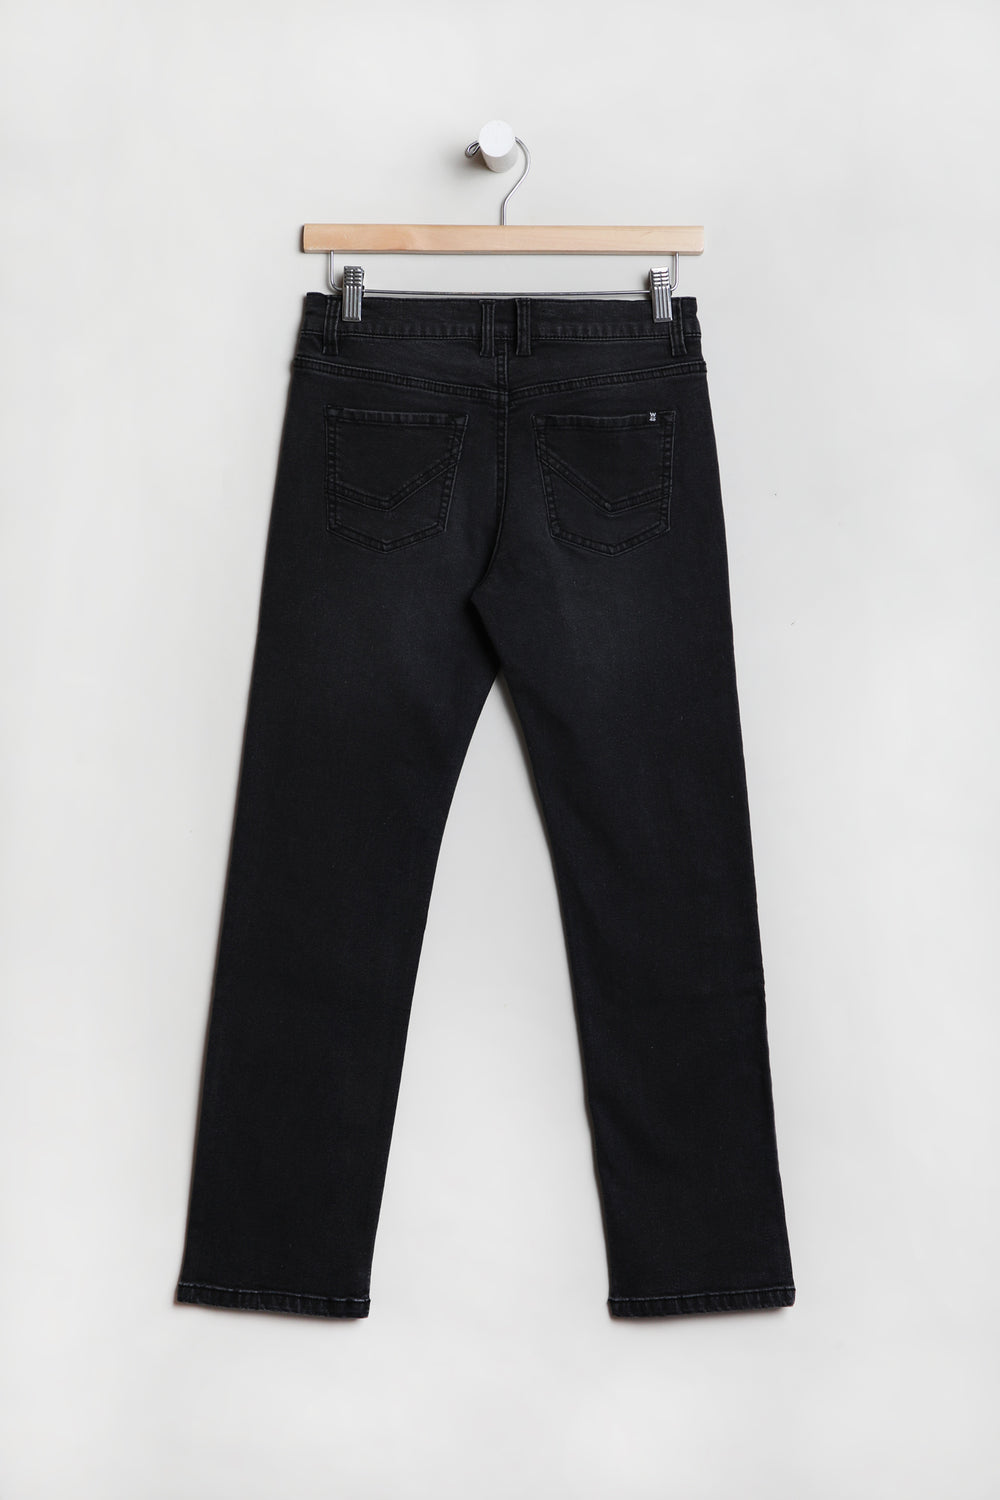 West49 Youth Washed Black Slim Jean Charcoal